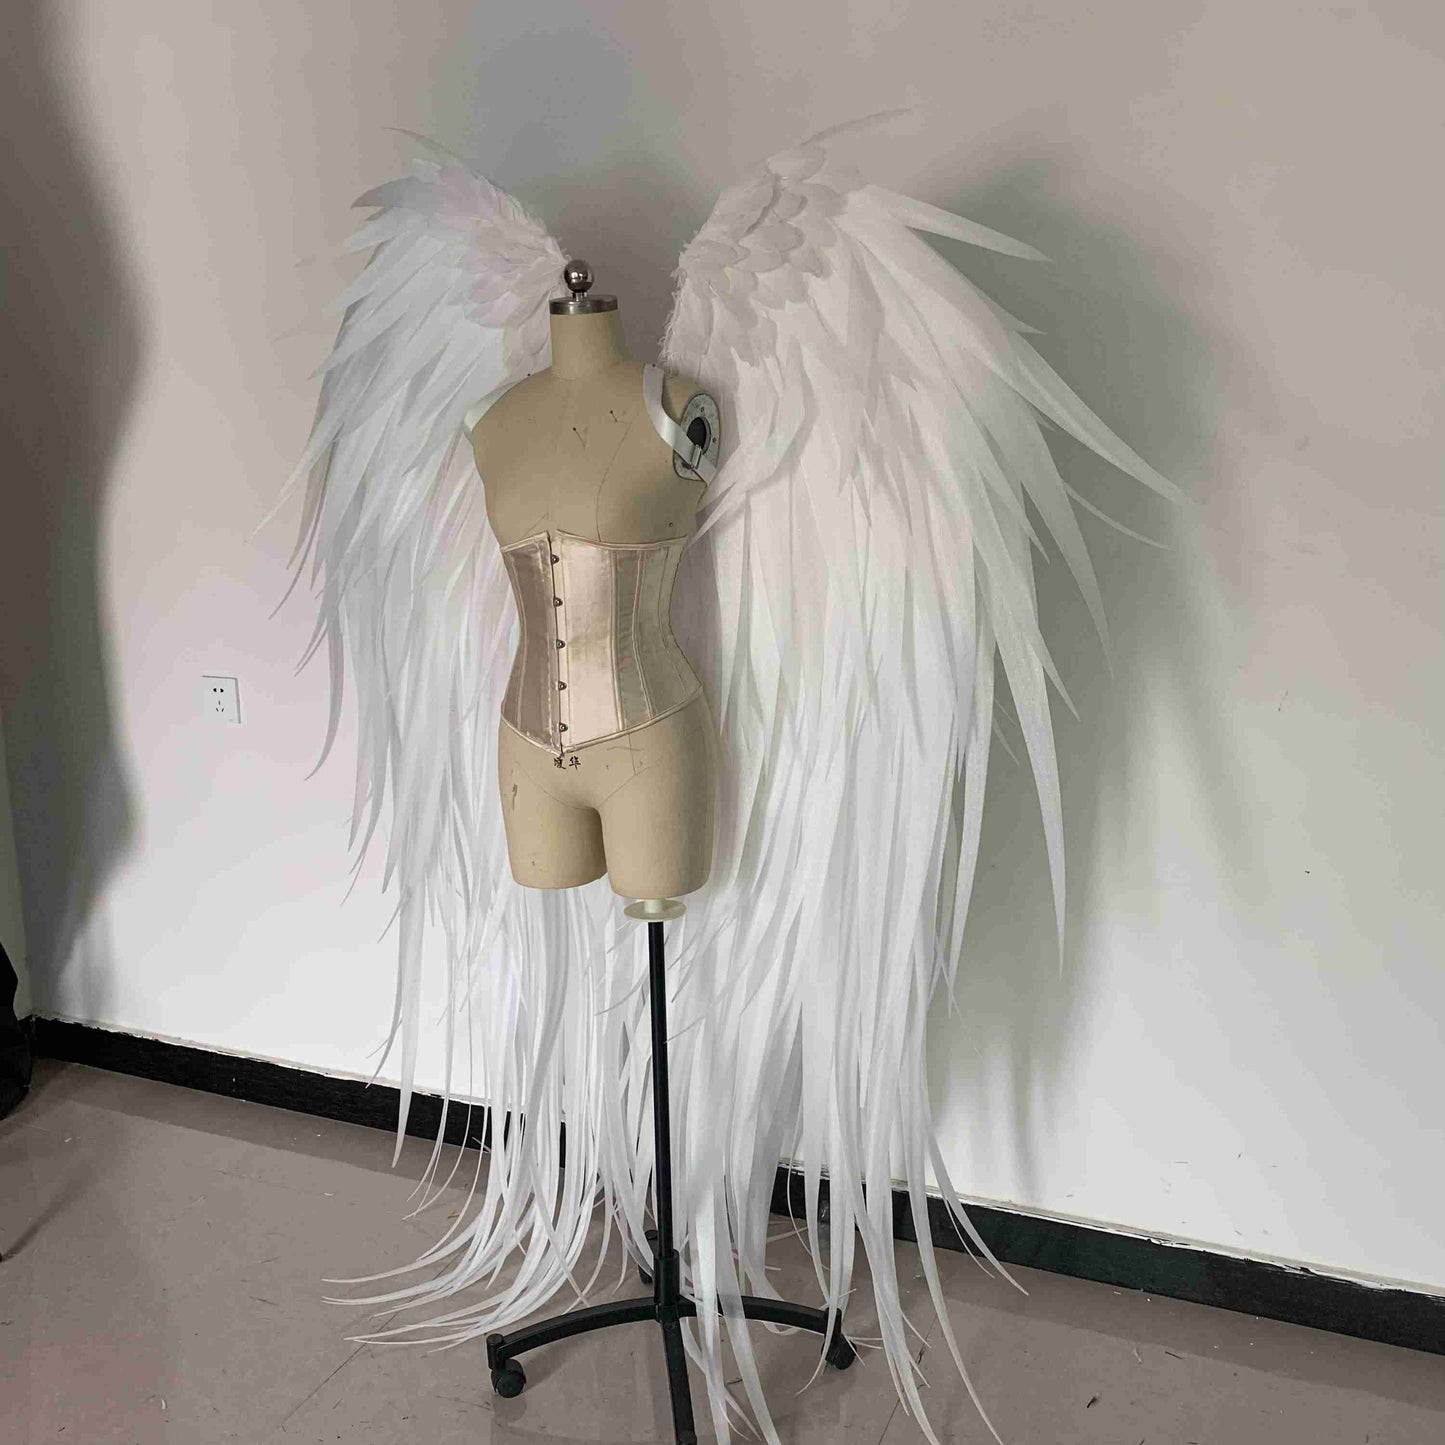 Our white angel wings from the left side. Made from pearl cotton foam and some goose feathers. Wings for angel costume. Suitable for photoshoots.